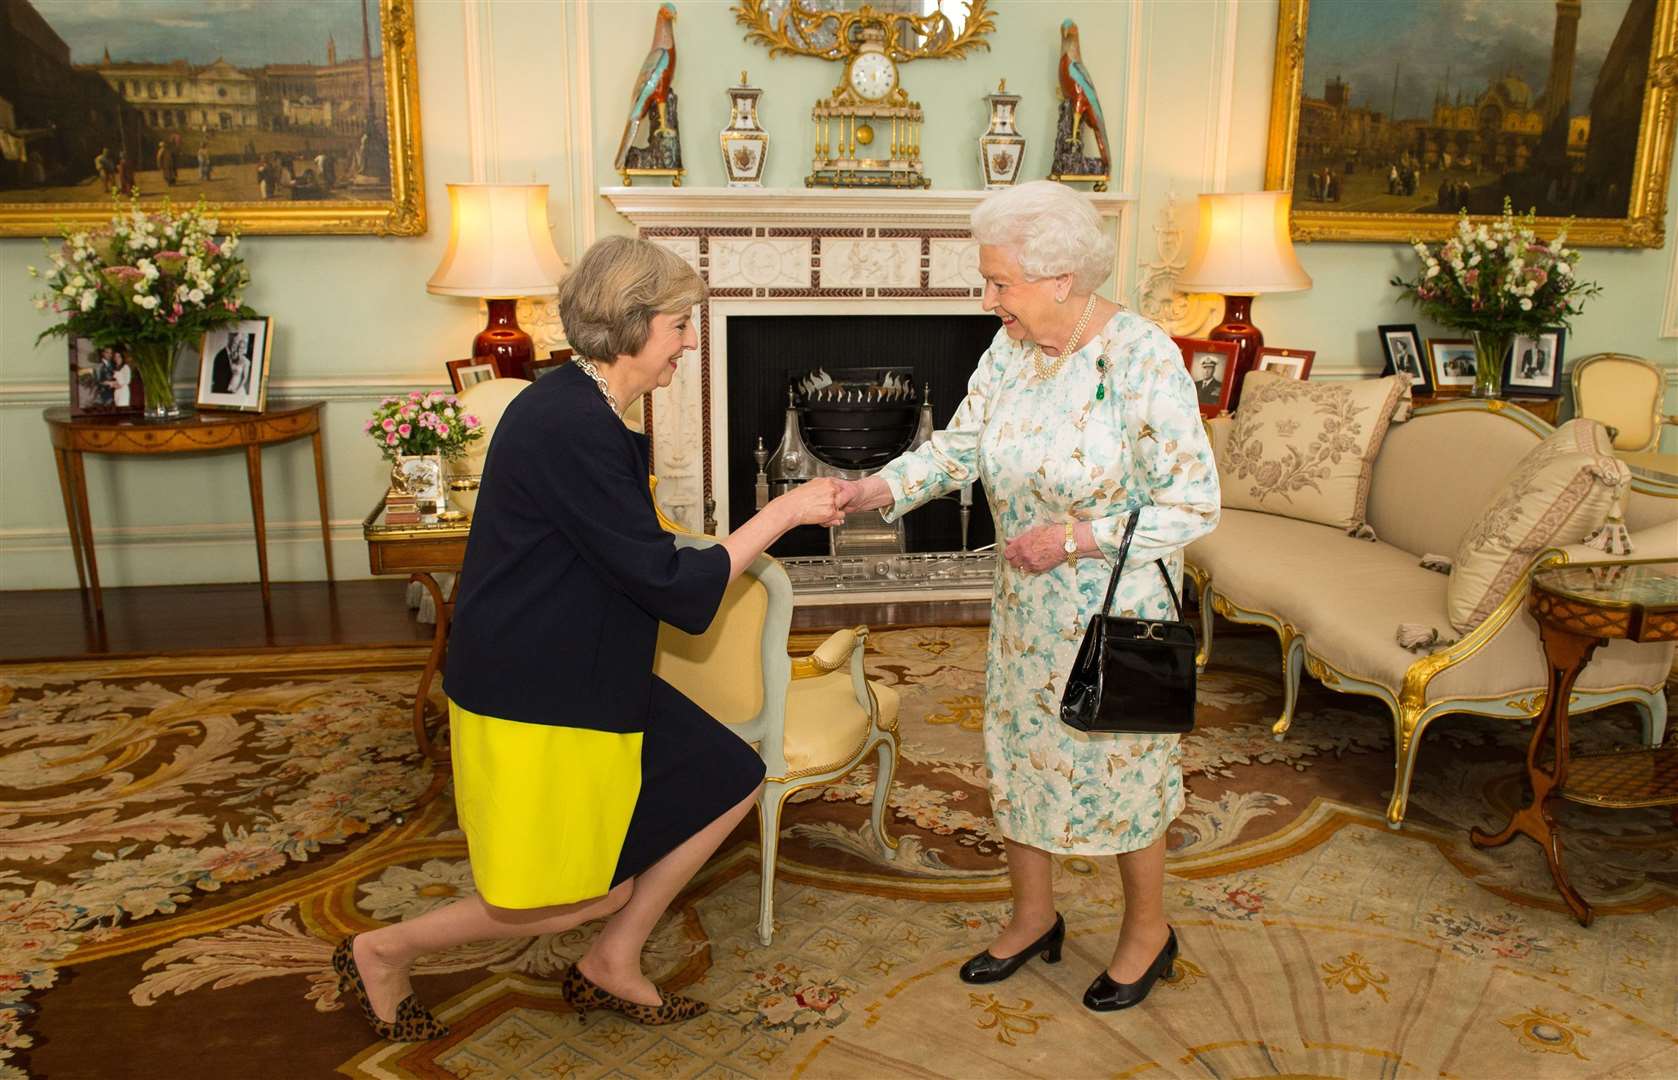 The Queen welcomes Theresa May for an audience where she invited the former home secretary to become prime minister and form a new government in 2016 (Dominic Lipinski/PA)